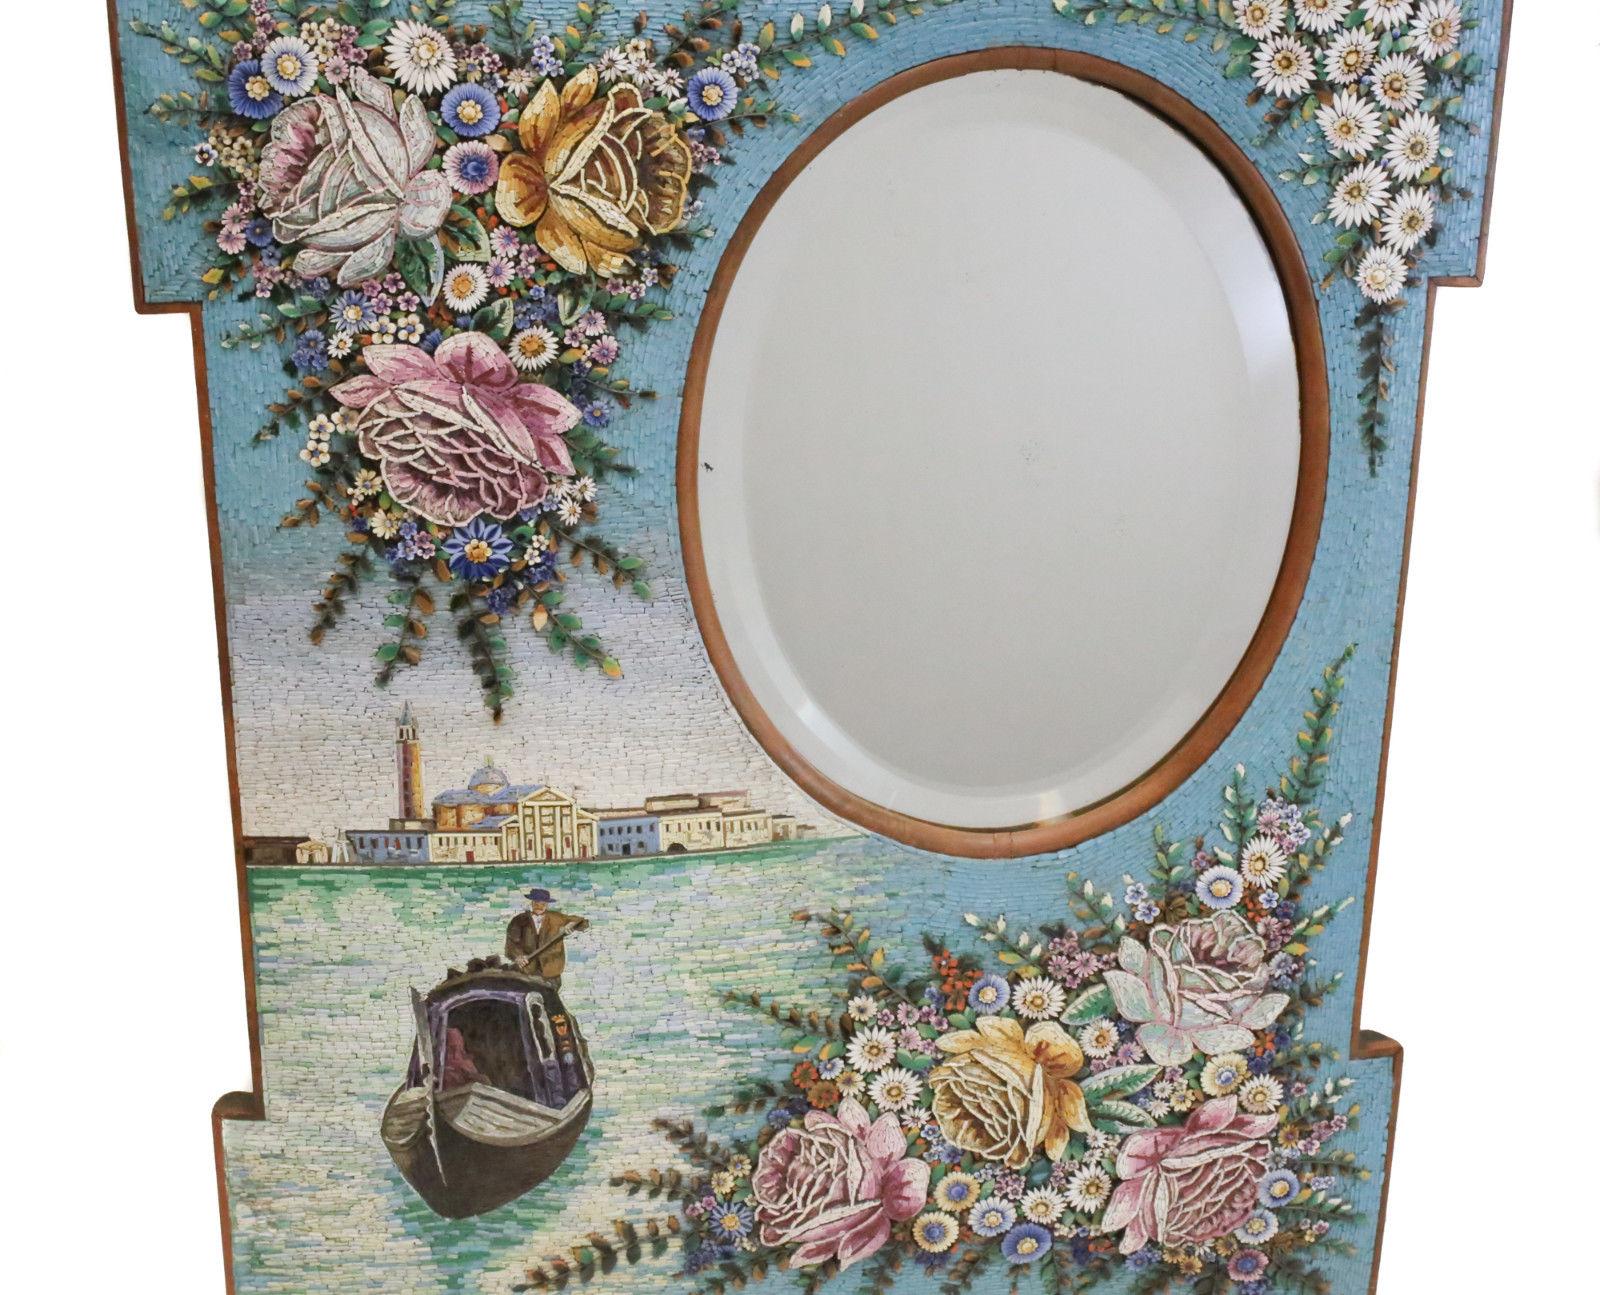 An exquisite antique Venetian micromosaic wall hanging mirror. The mirror has stunning micromosaic tiles depicting the Grand Canals in Venice, Italy with floral accents. An oval shaped mirror to the upper right. Weight Approx., 15